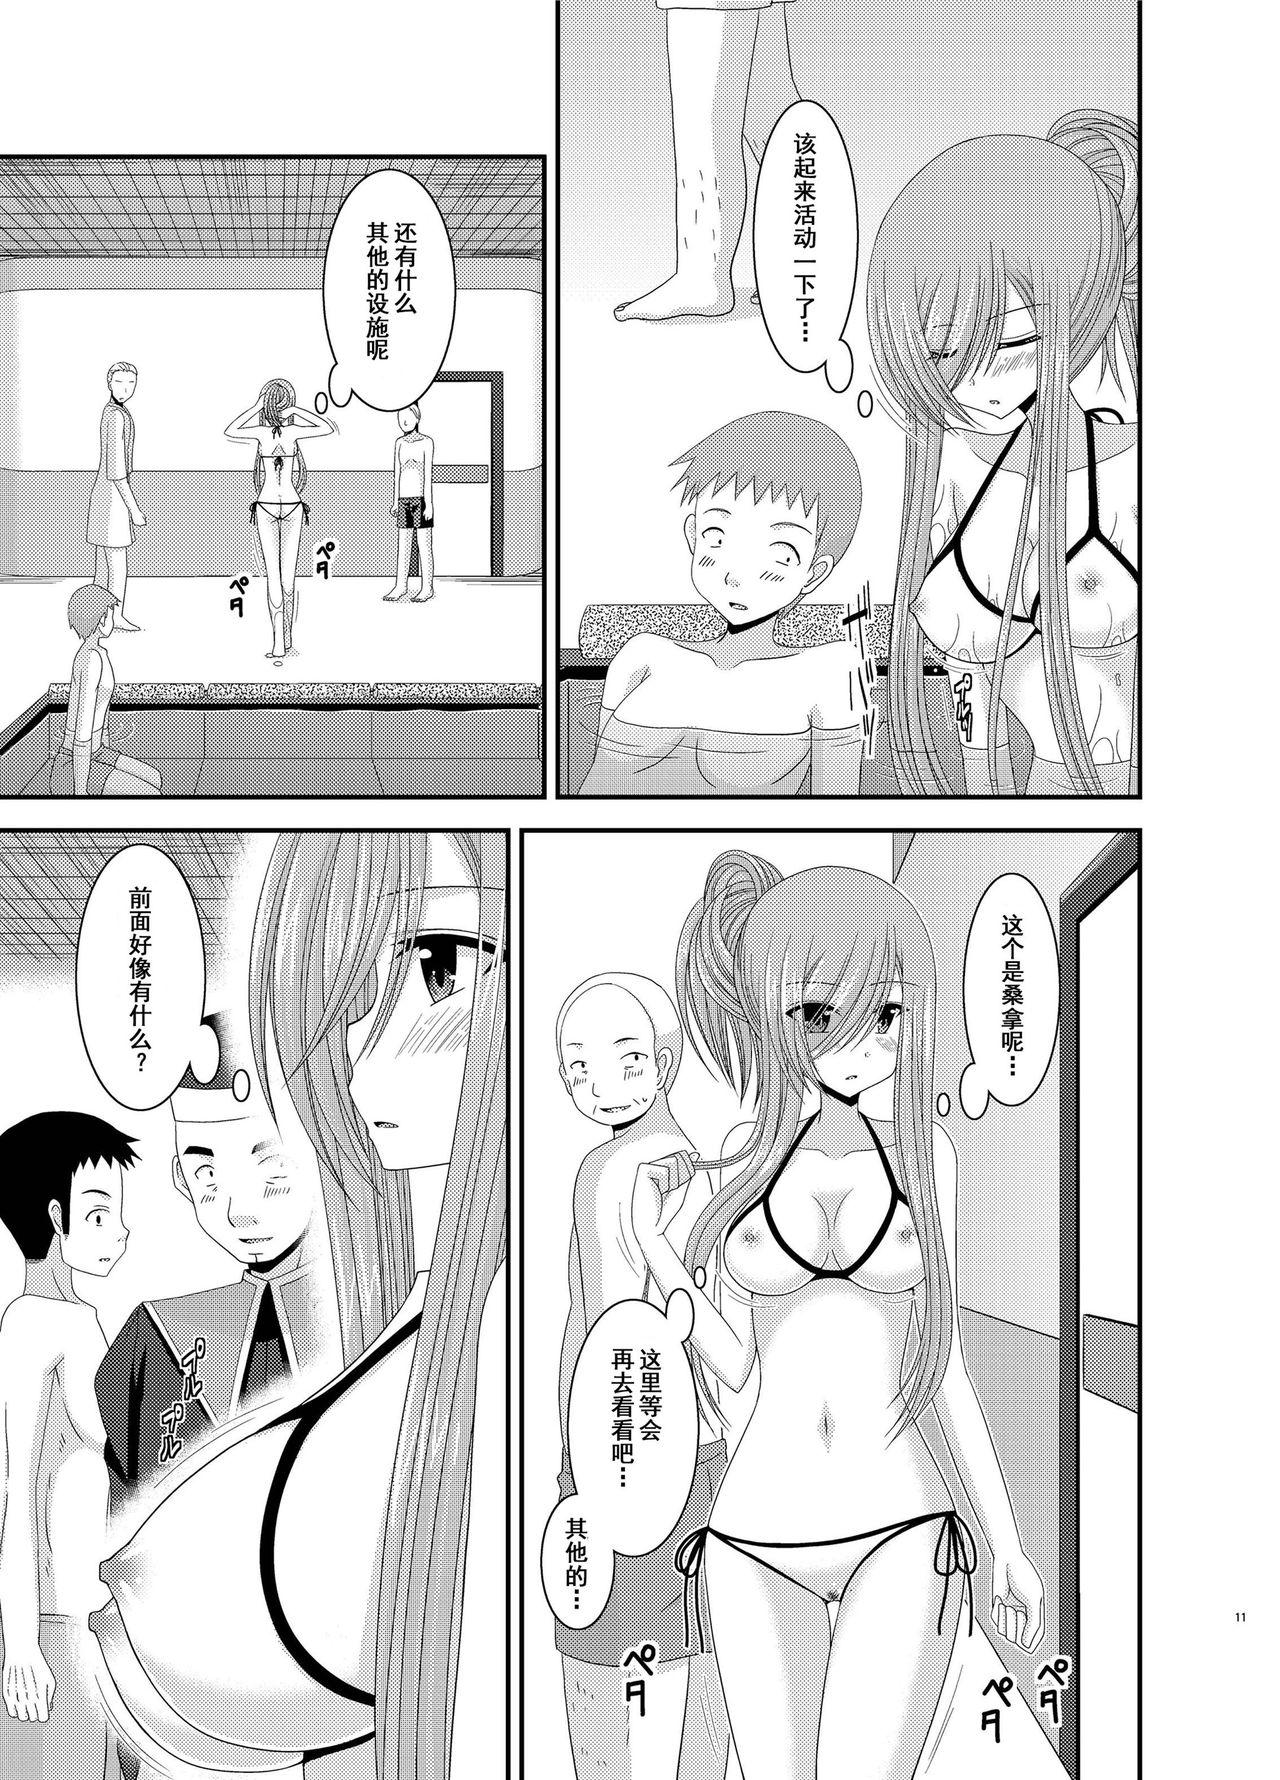 Teen Hardcore Melon ga Chou Shindou! R Soushuuhen III - Tales of the abyss Pussy Fucking - Page 11